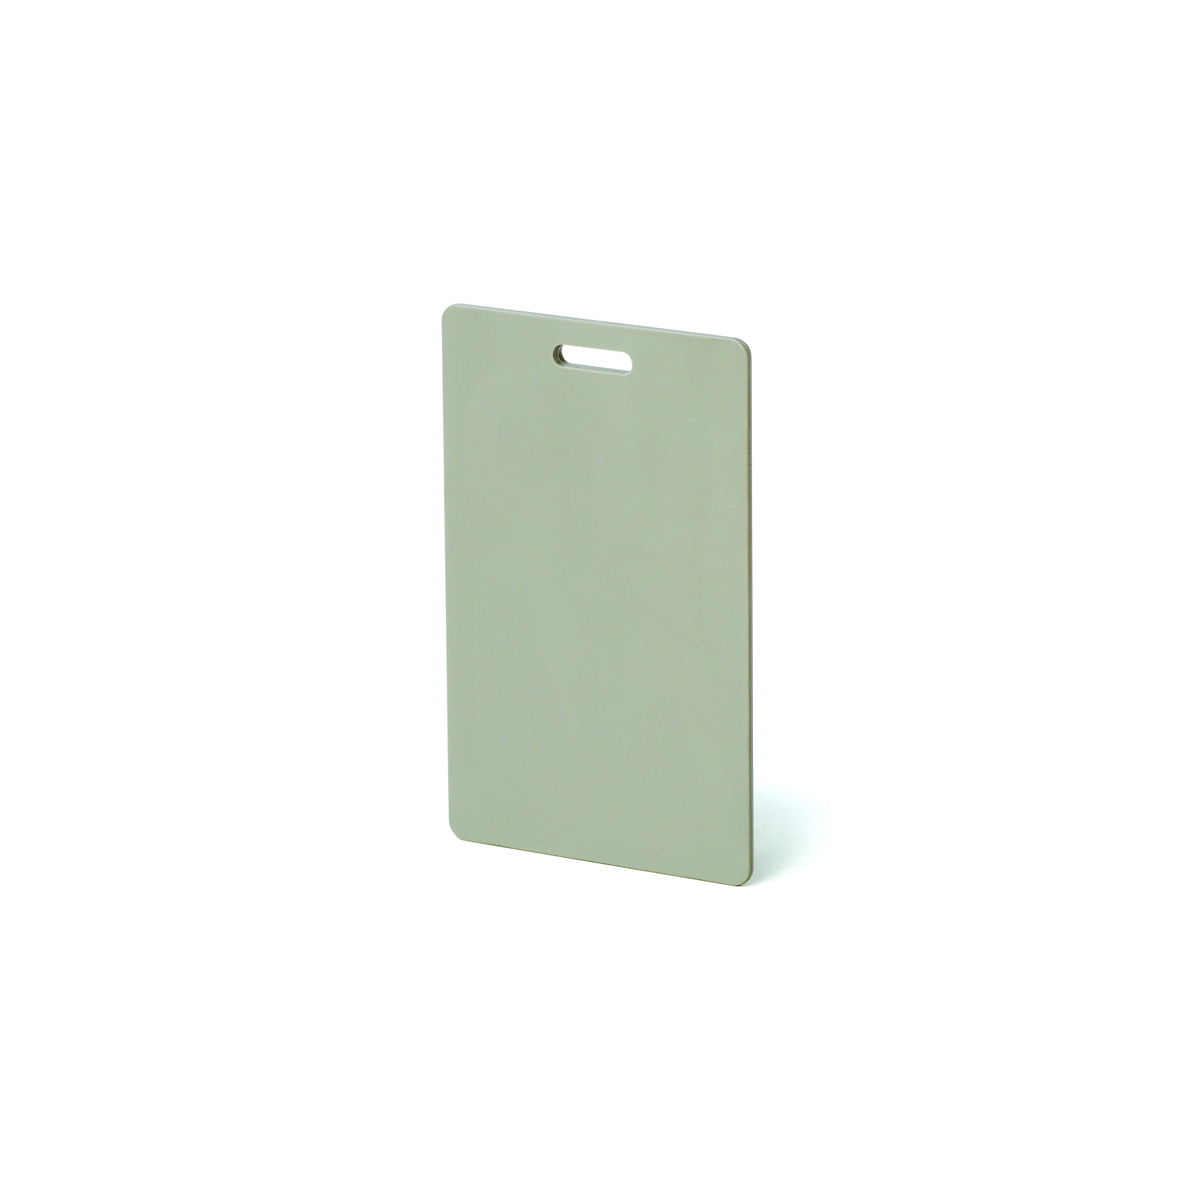 Cotag Pre-Programmed Passive Proximity Clamshell Cards - Pack of 10